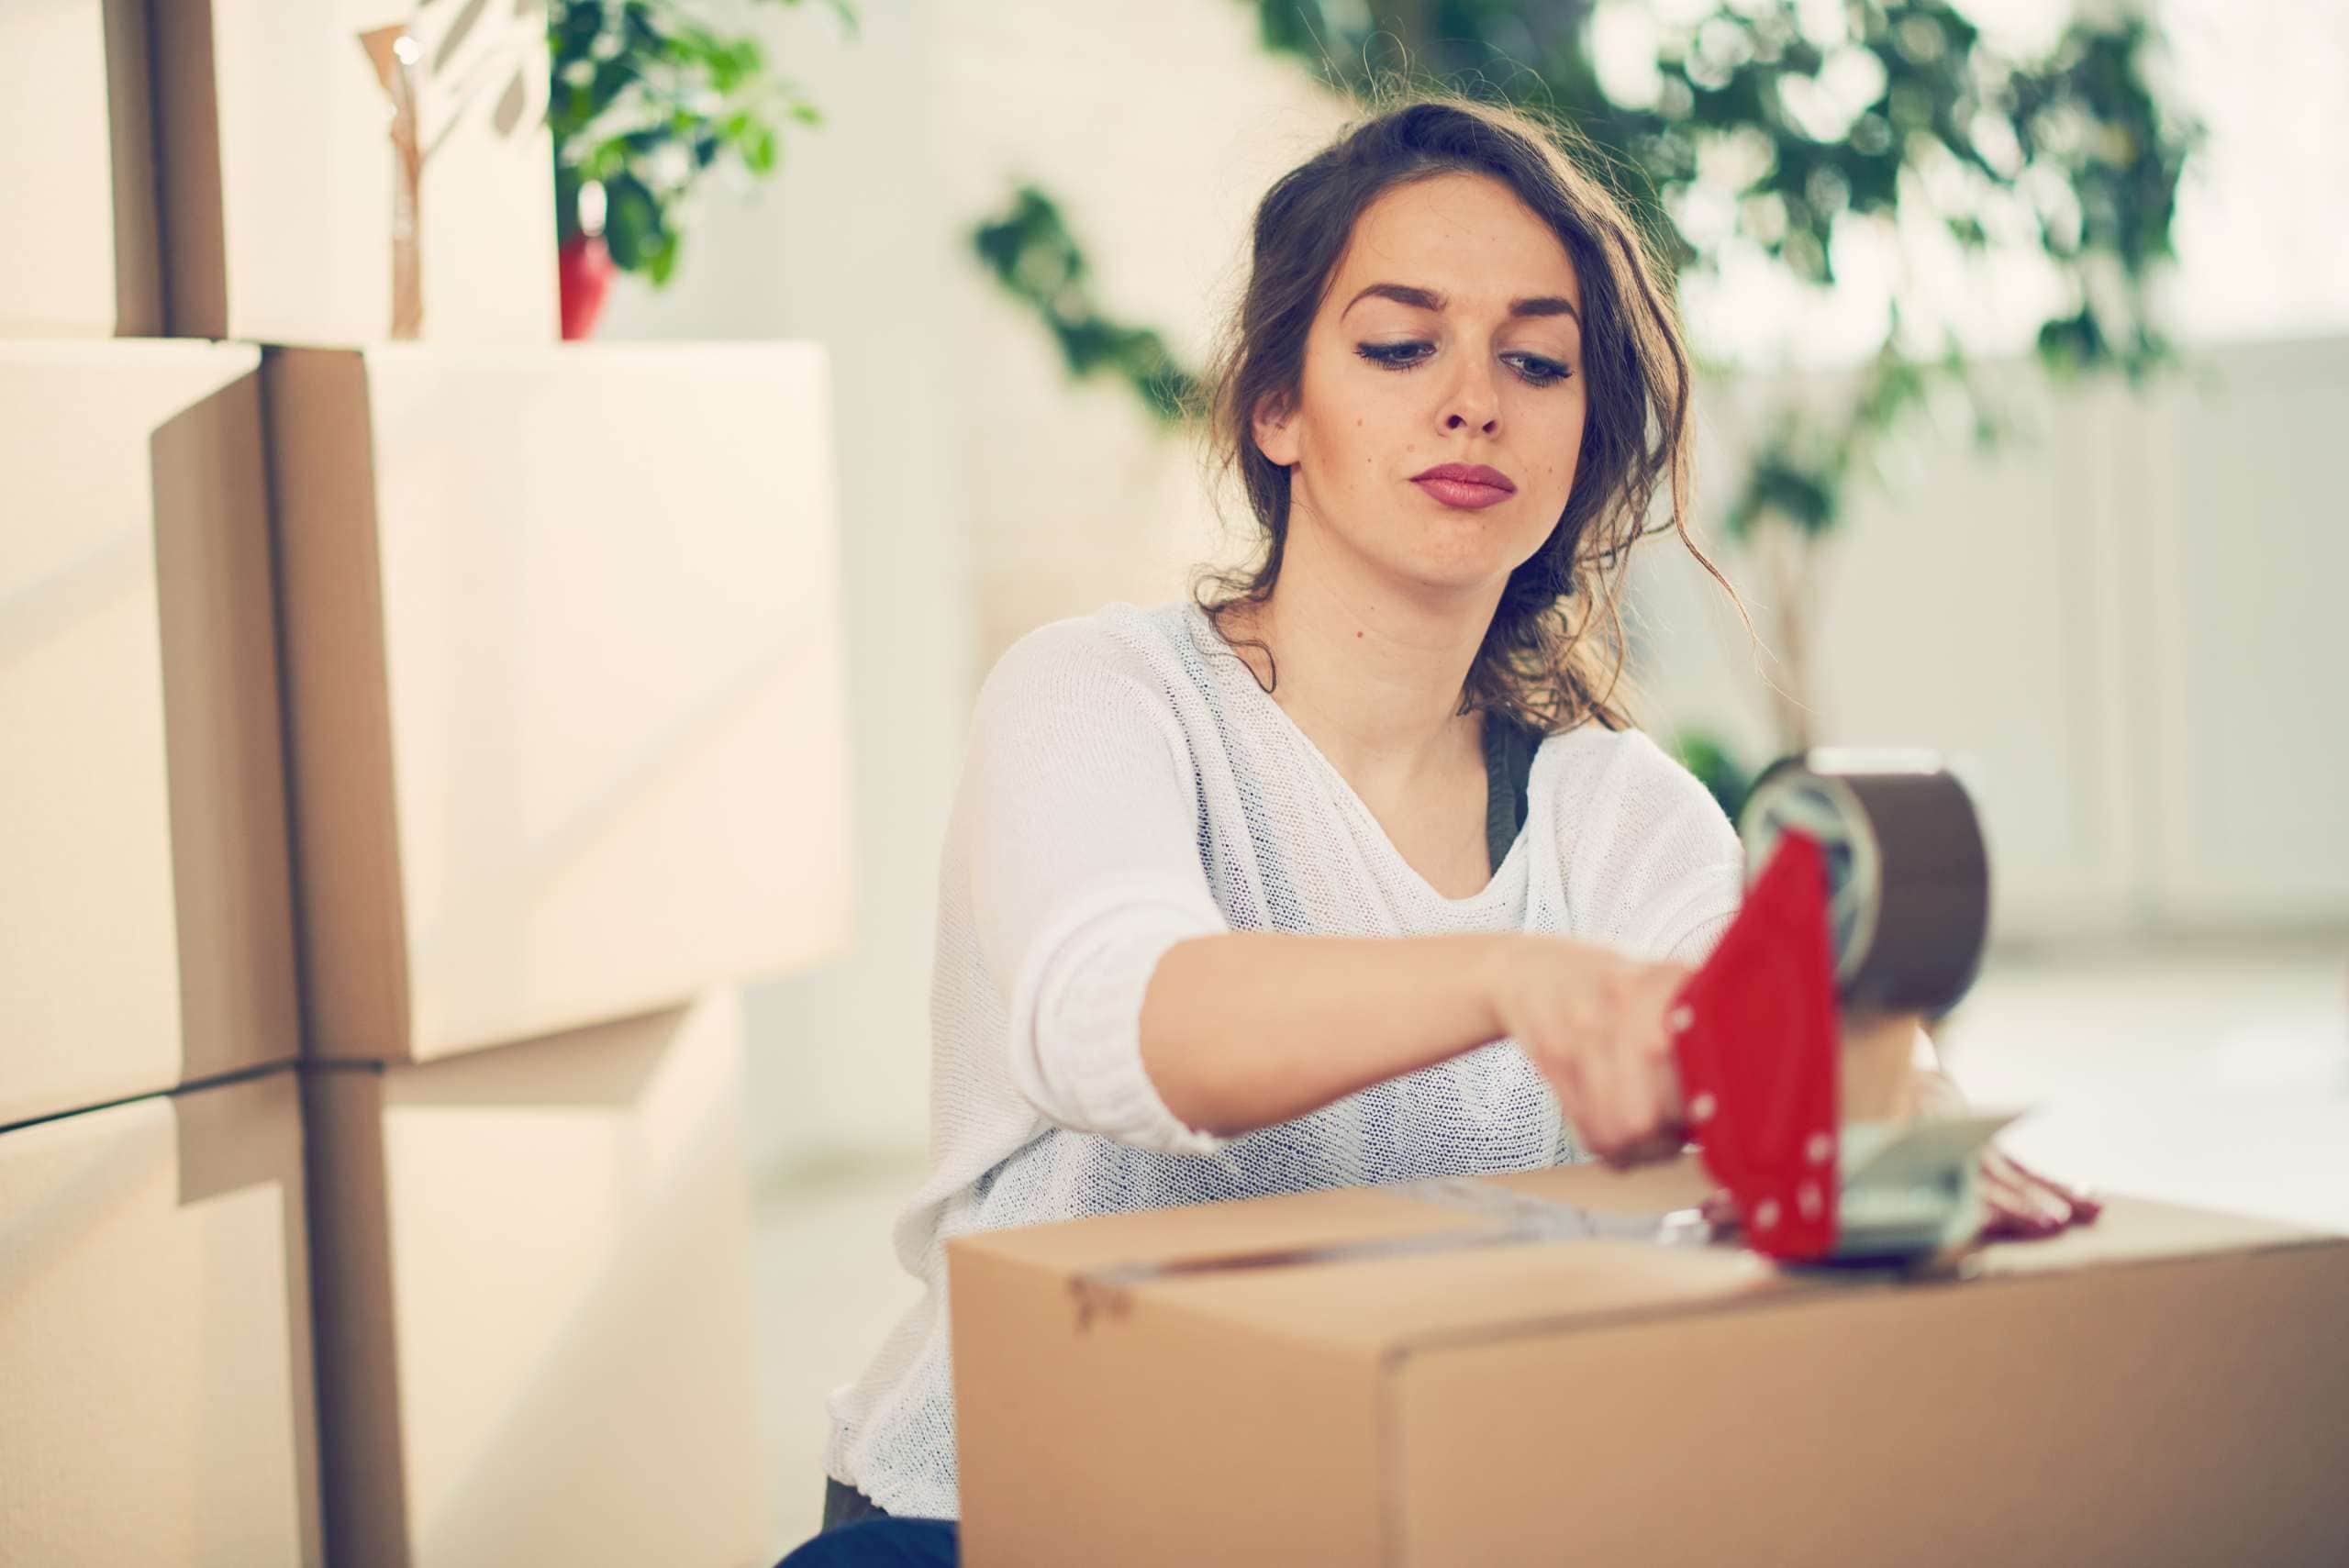 Image of a woman packing boxes, accompanying family law article "Don’t Delay Your Property Settlement"